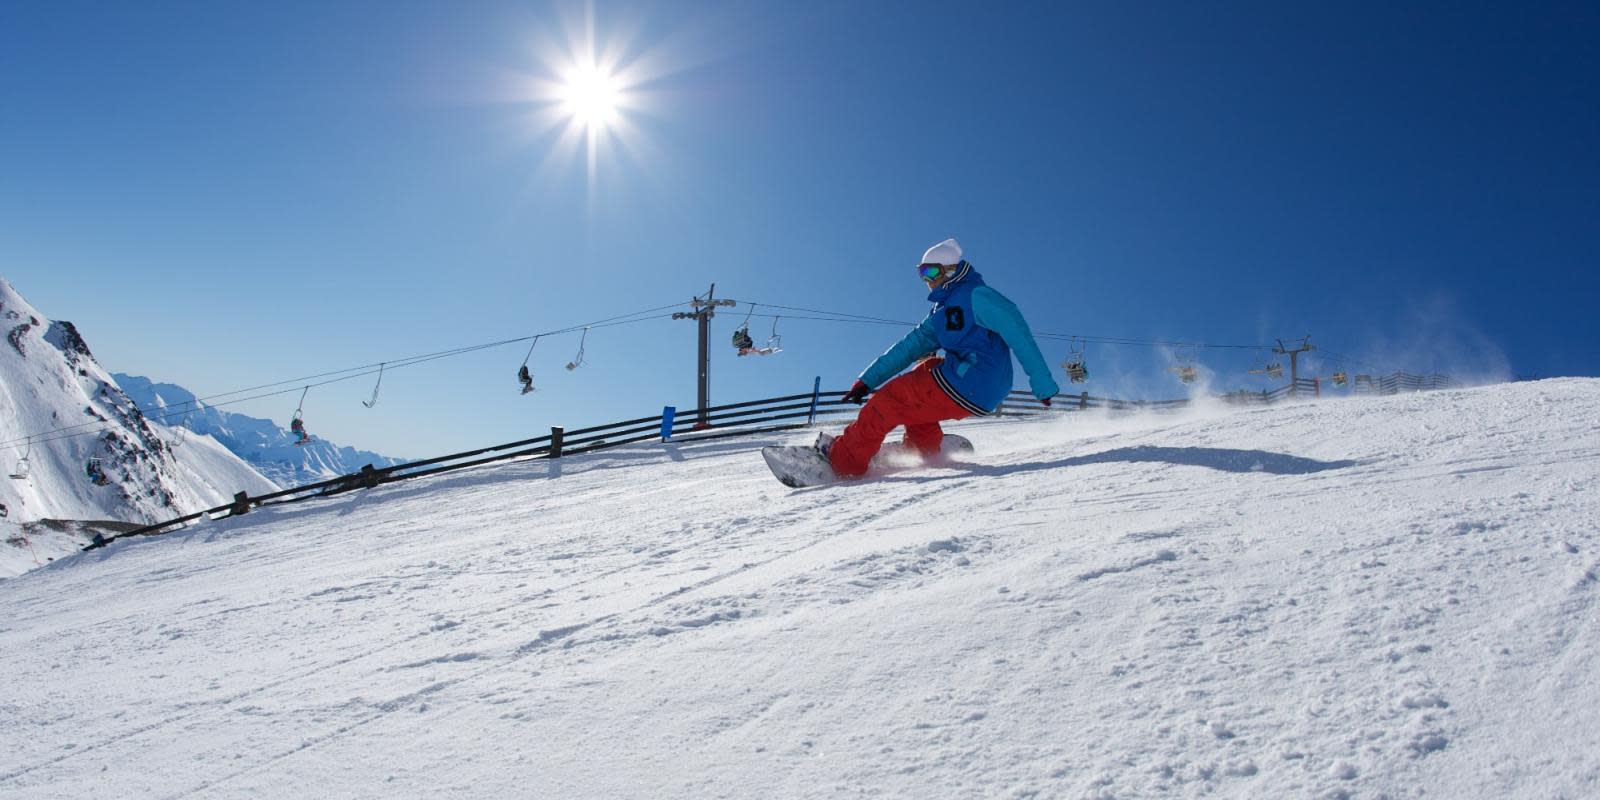 Snowboarder riding at The Remarkables ski field